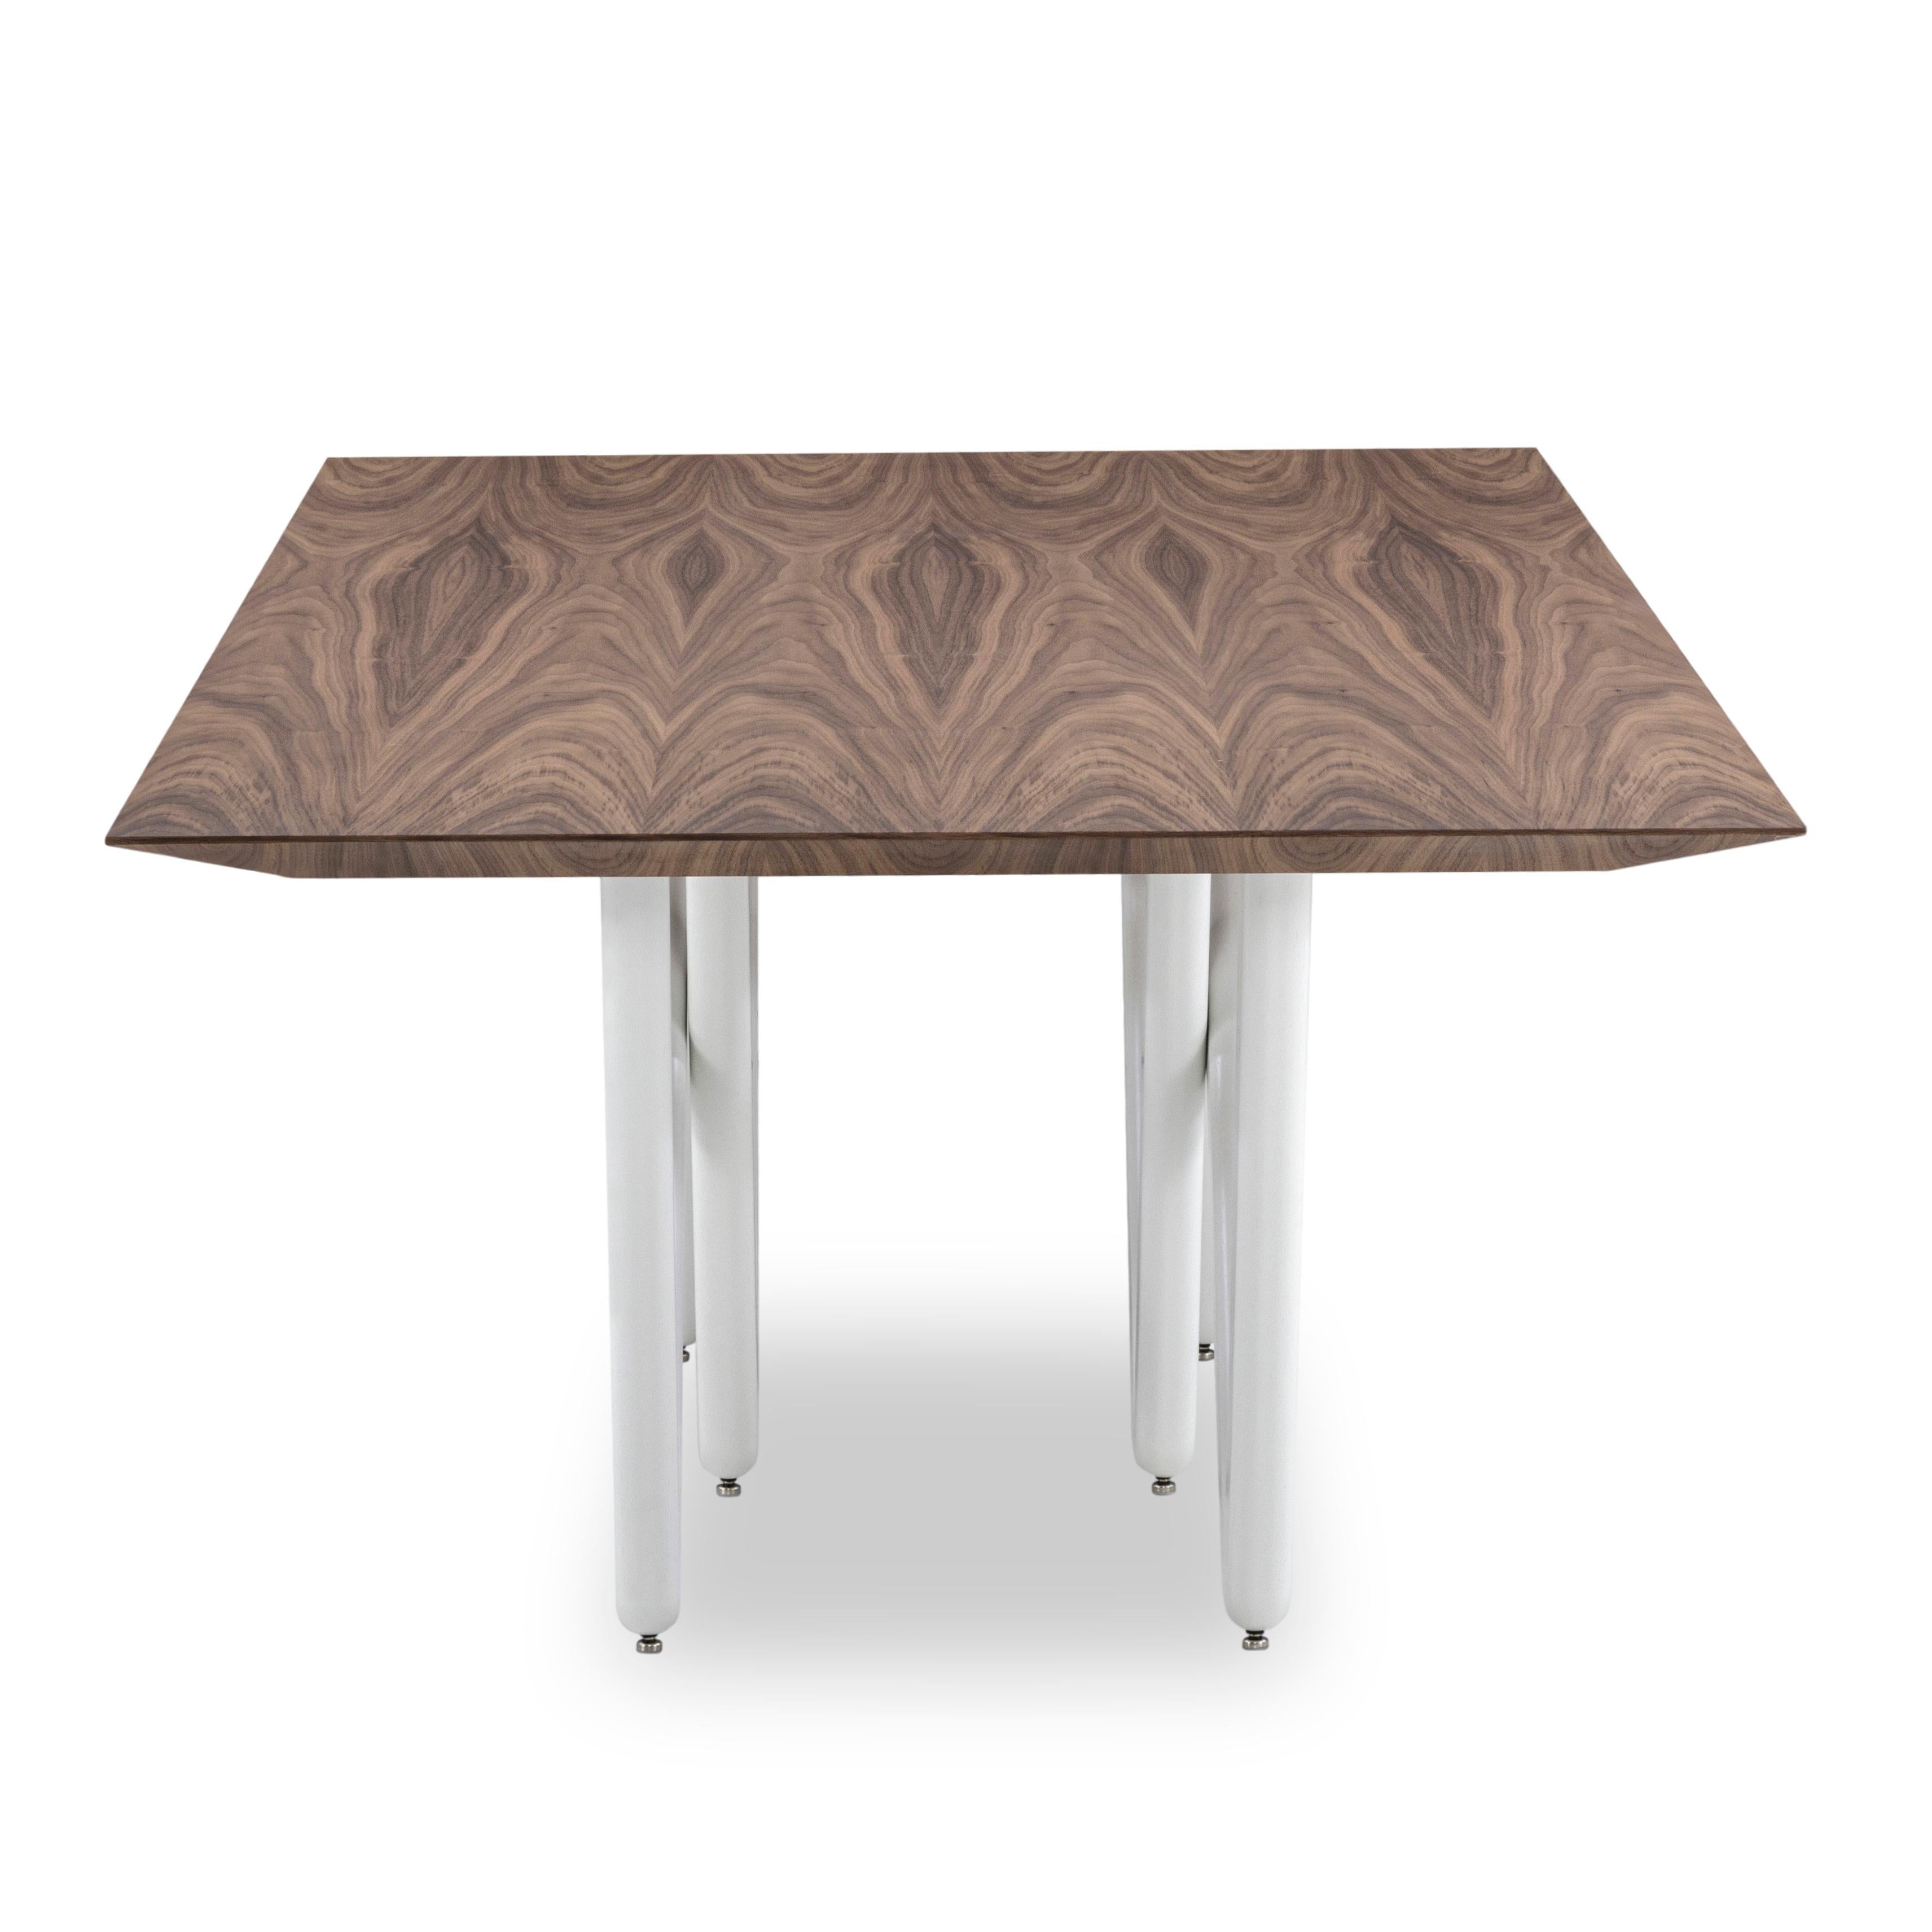 Brazilian Dablio Dining Table with a Walnut Wood Veneered Table Top and White Base 98'' For Sale